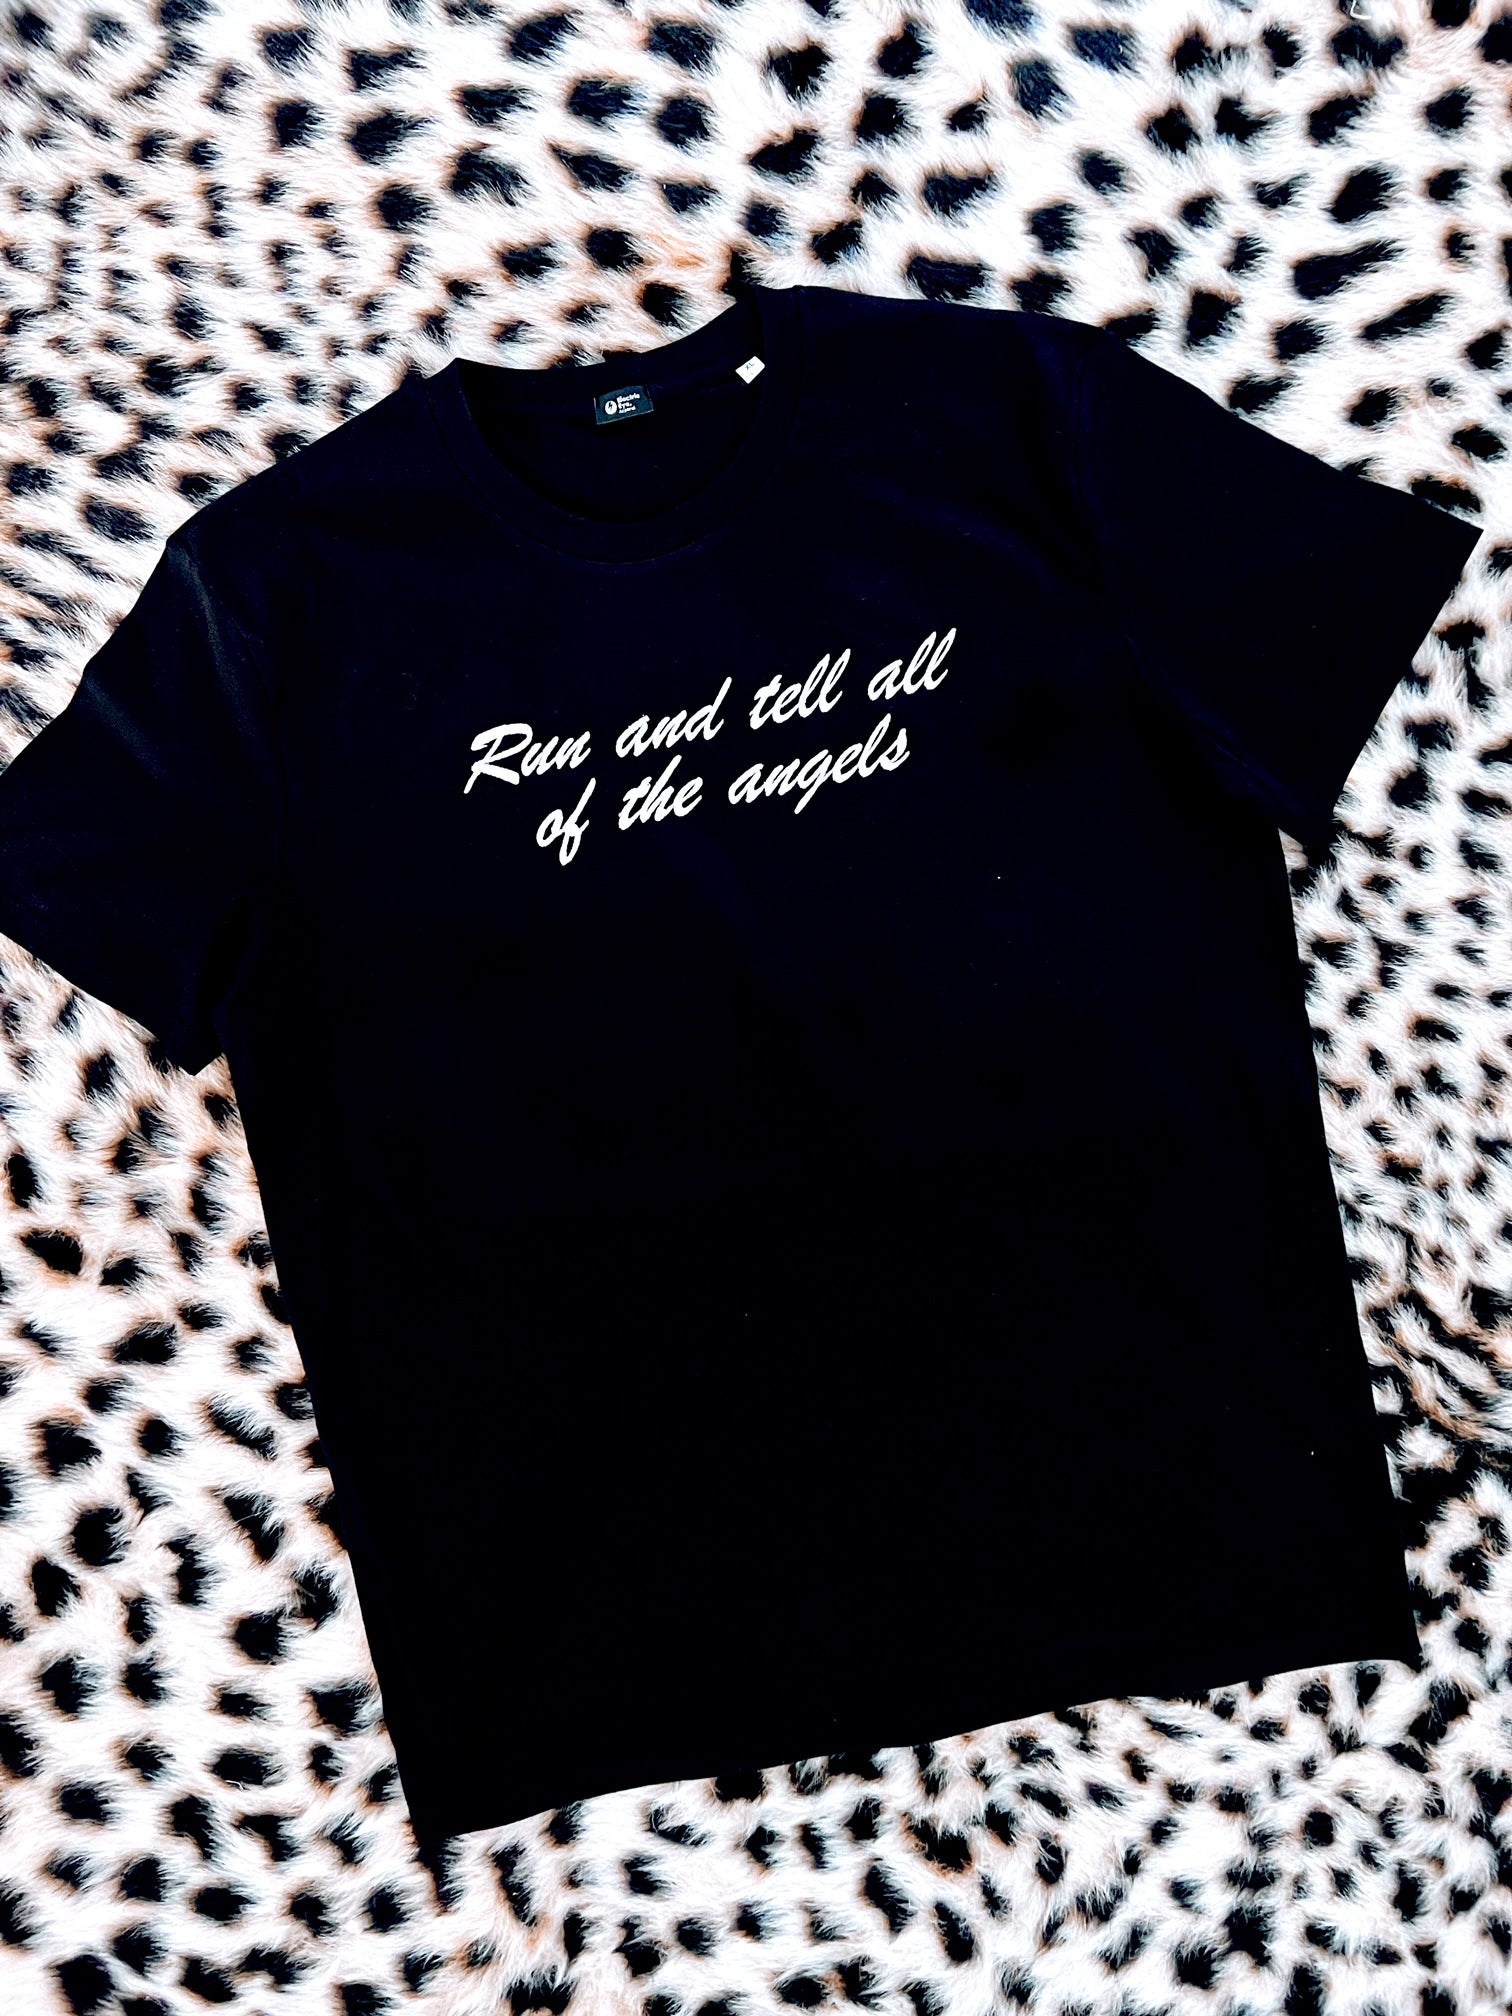 SAMPLE SALE 'RUN AND TELL ALL OF THE ANGELS' EMBROIDERED UNISEX MEDIUM FIT ORGANIC COTTON 'ROCKER' T-SHIRT (SIZE XL)